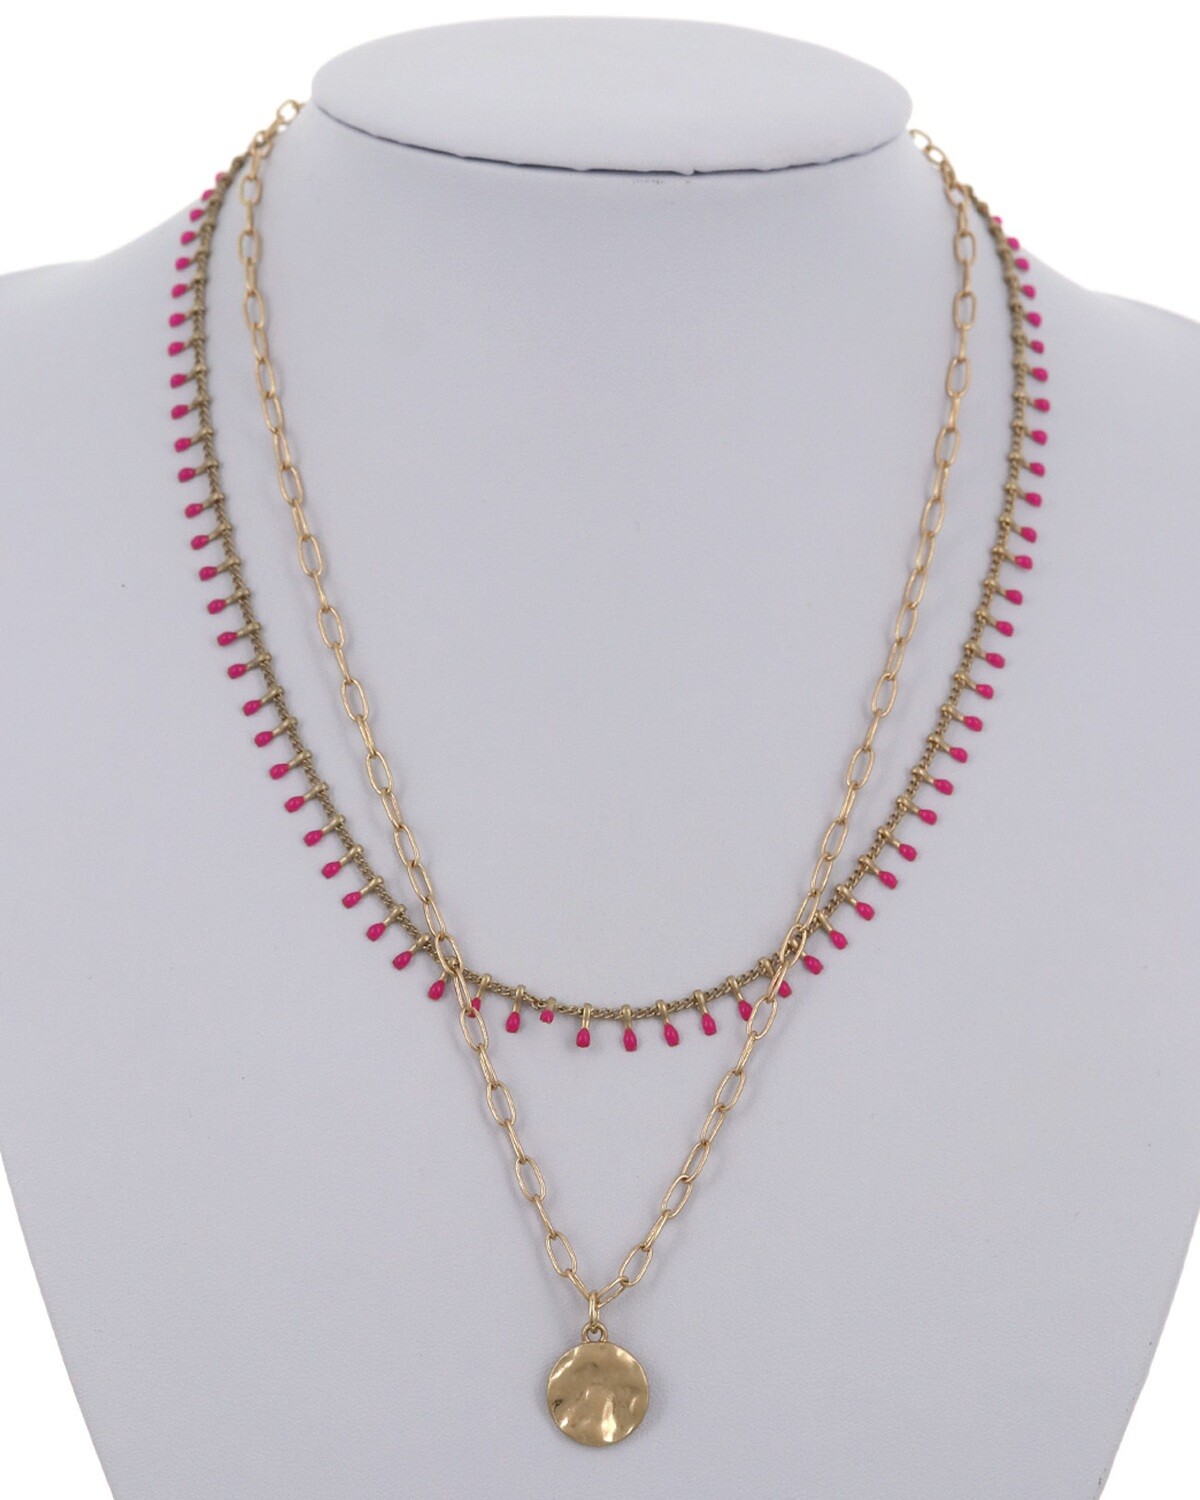 Double Strand Hot Pink & Gold Necklace